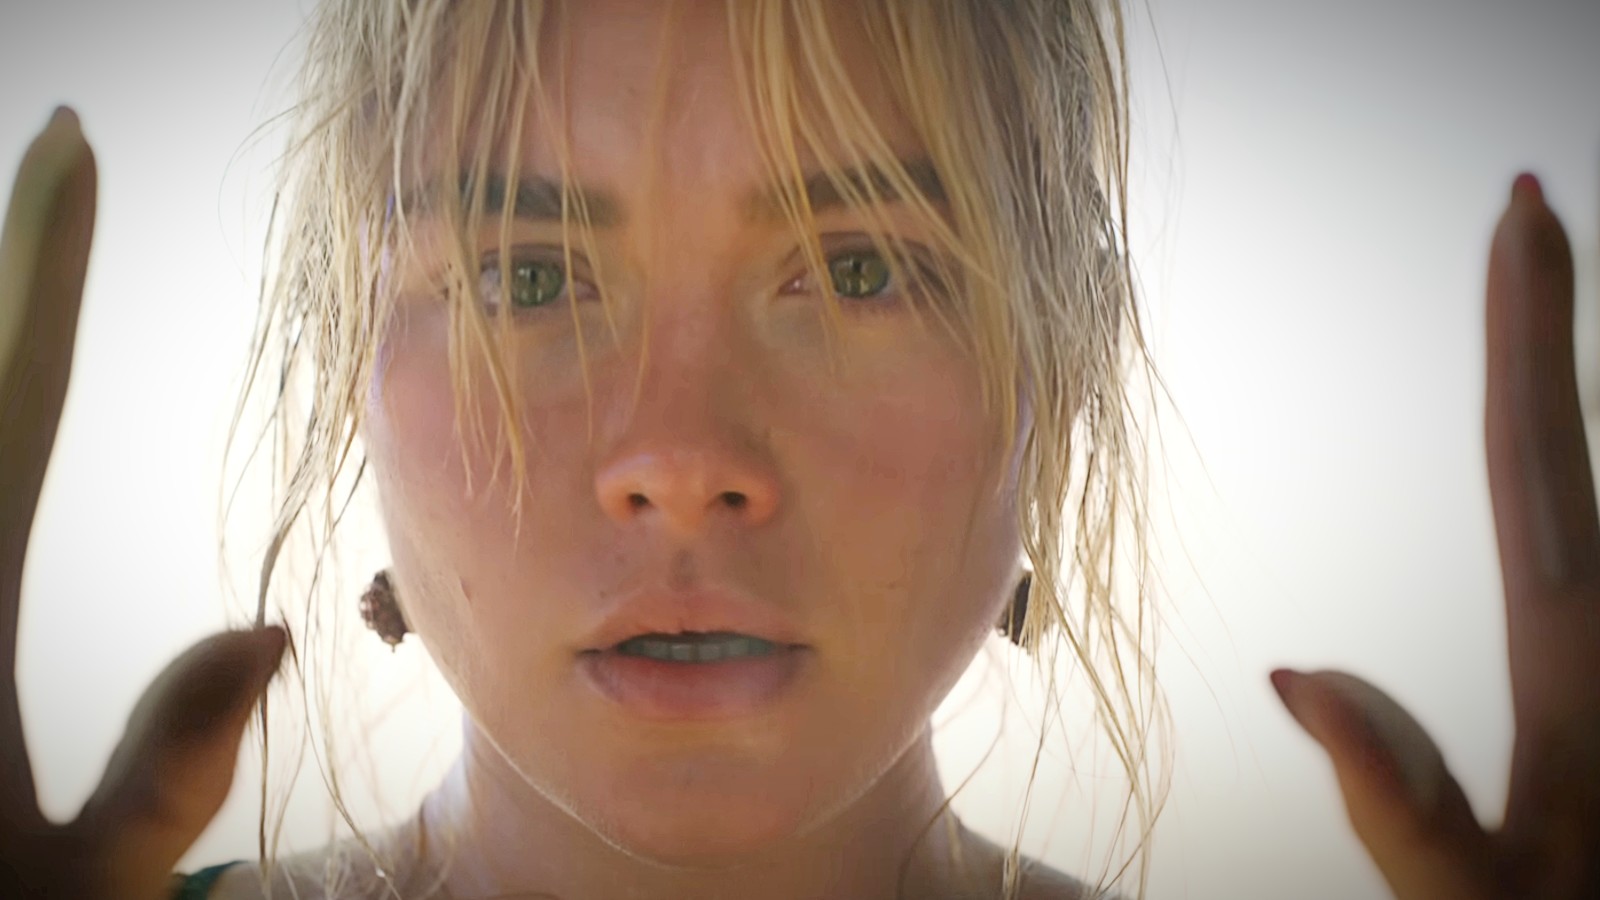 A still image of Florence Pugh's face in character from 'Don't Worry Darling' with her hands framing her face, showing a shocked expression.